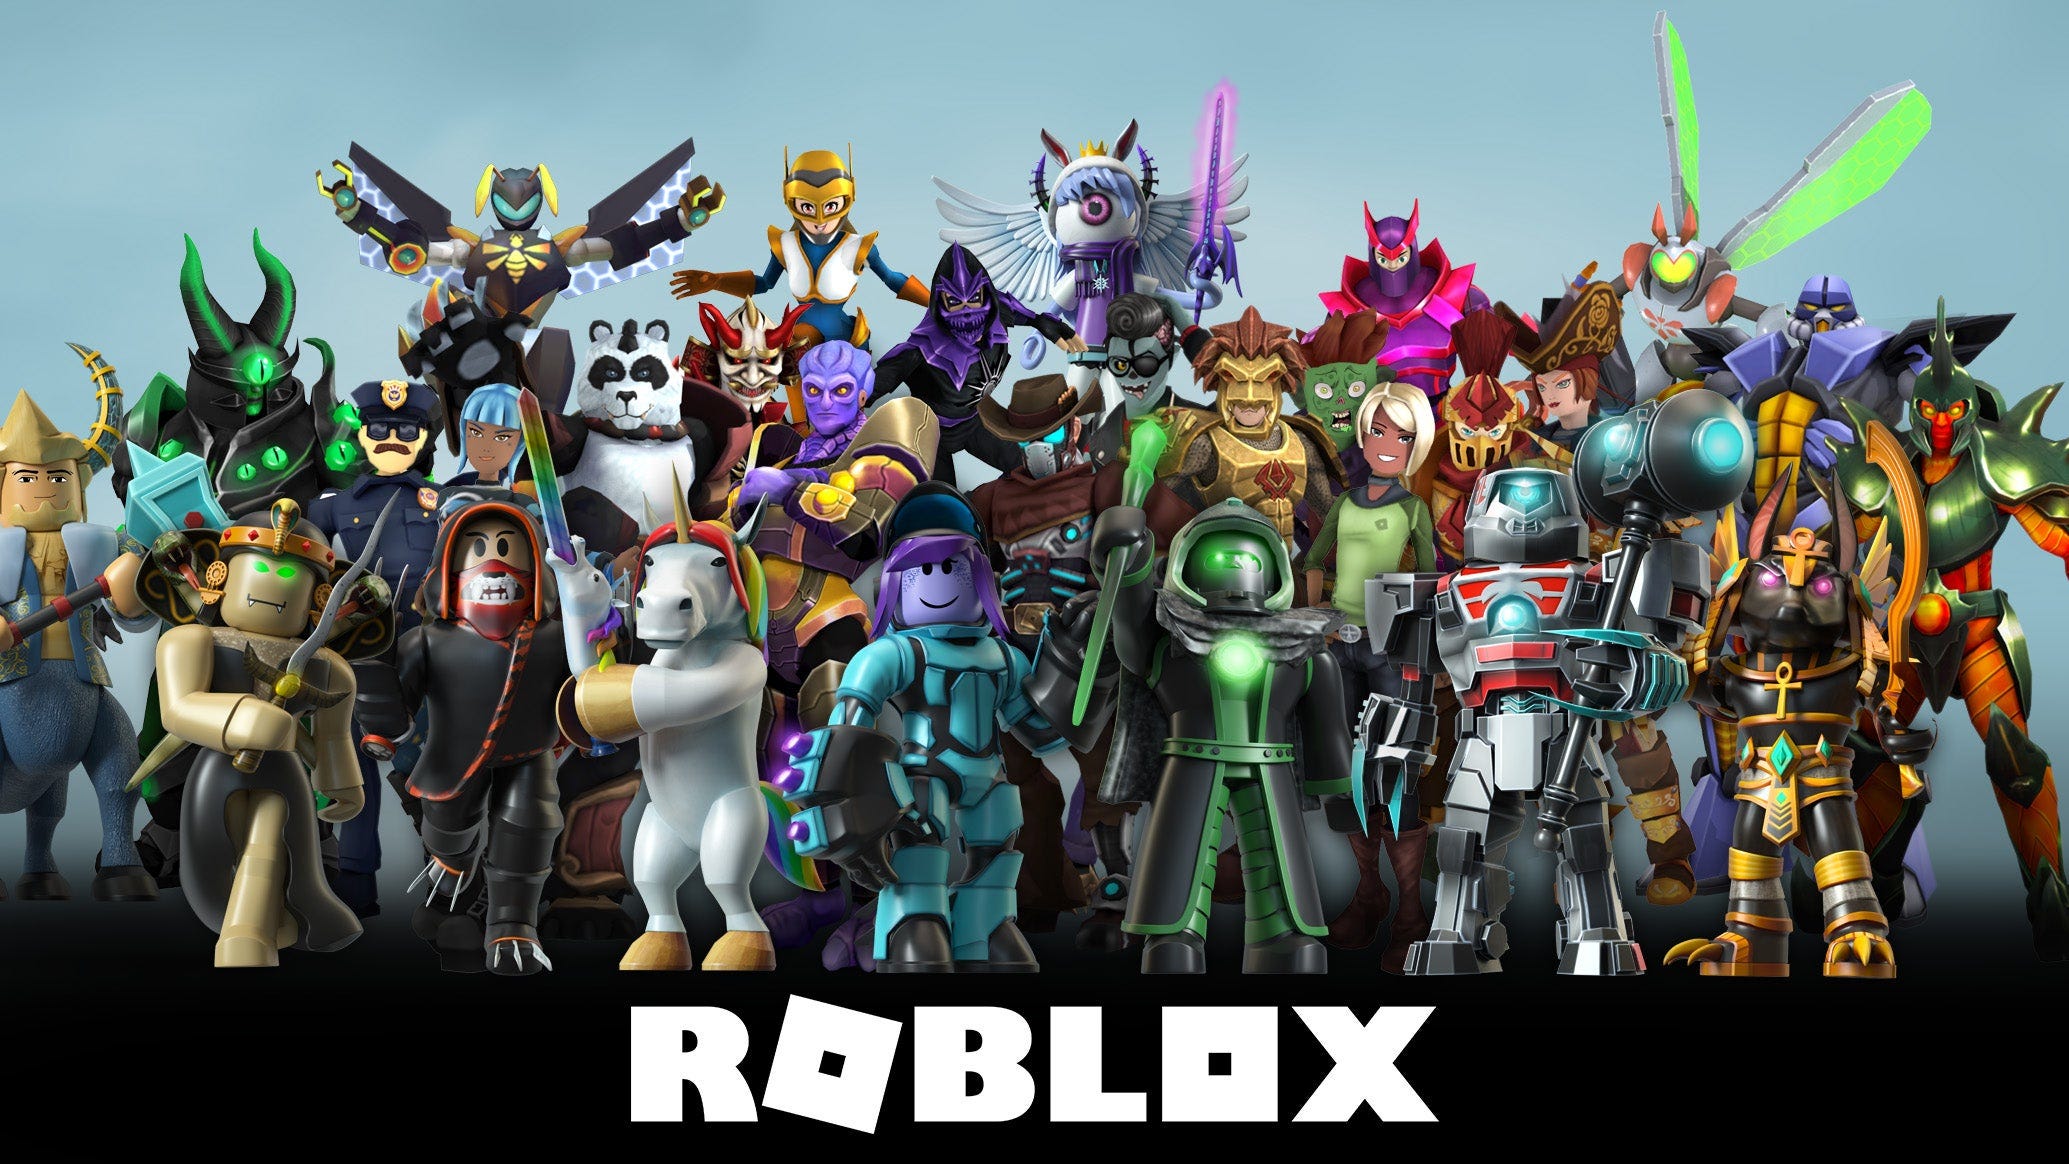 Roblox Is Adding Voice Chat Planning To Introduce A Safe Feature - roblox reddit good games